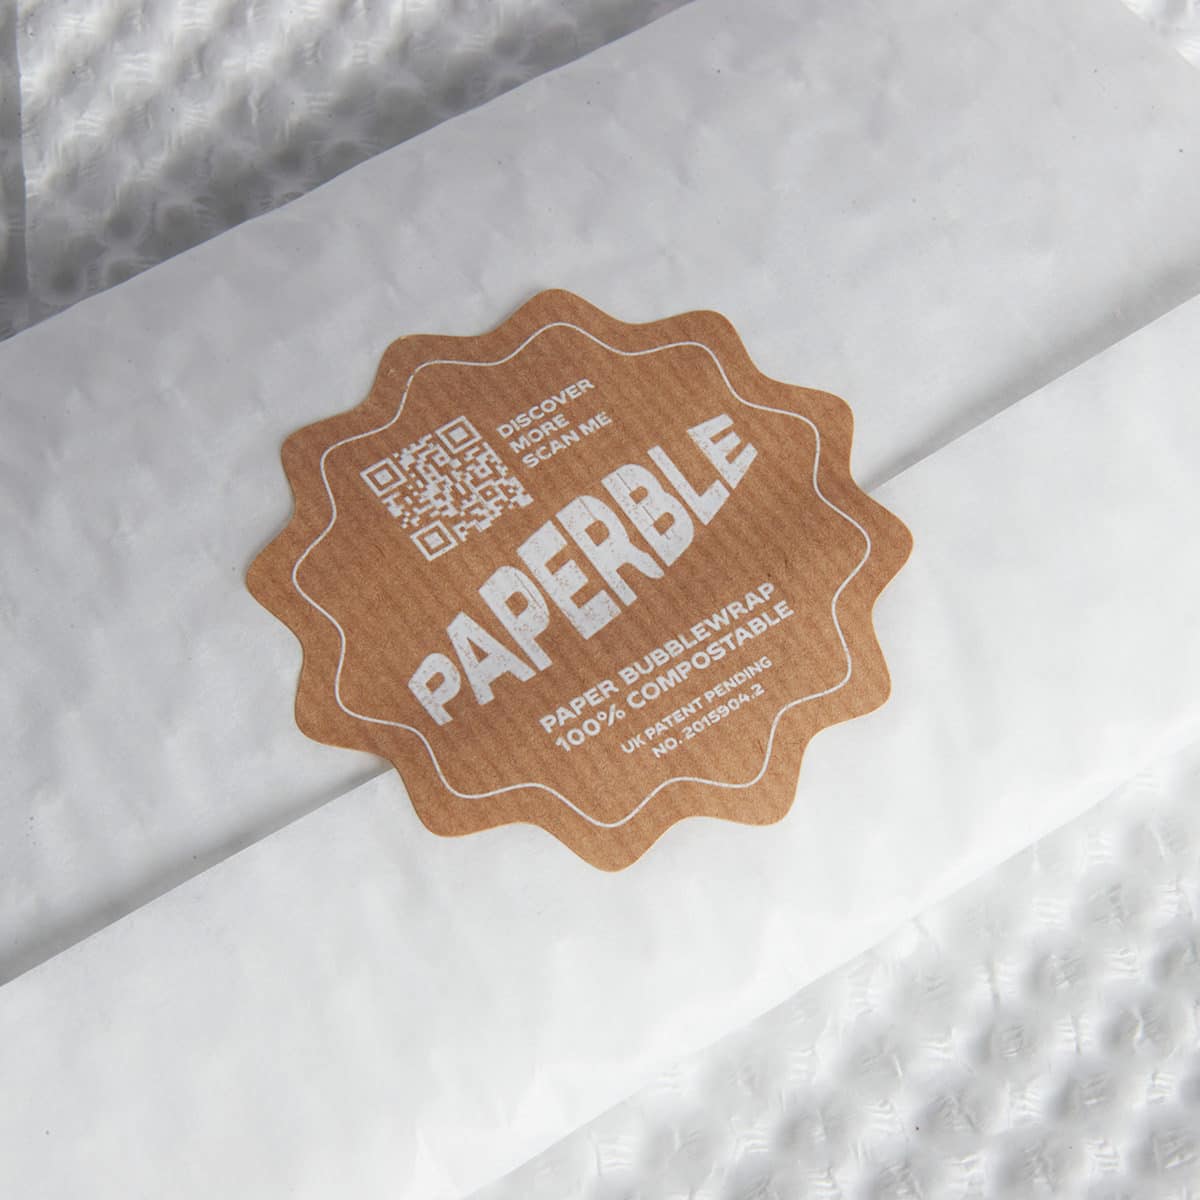 75x75mm Paperble™ Self Adhesive Label